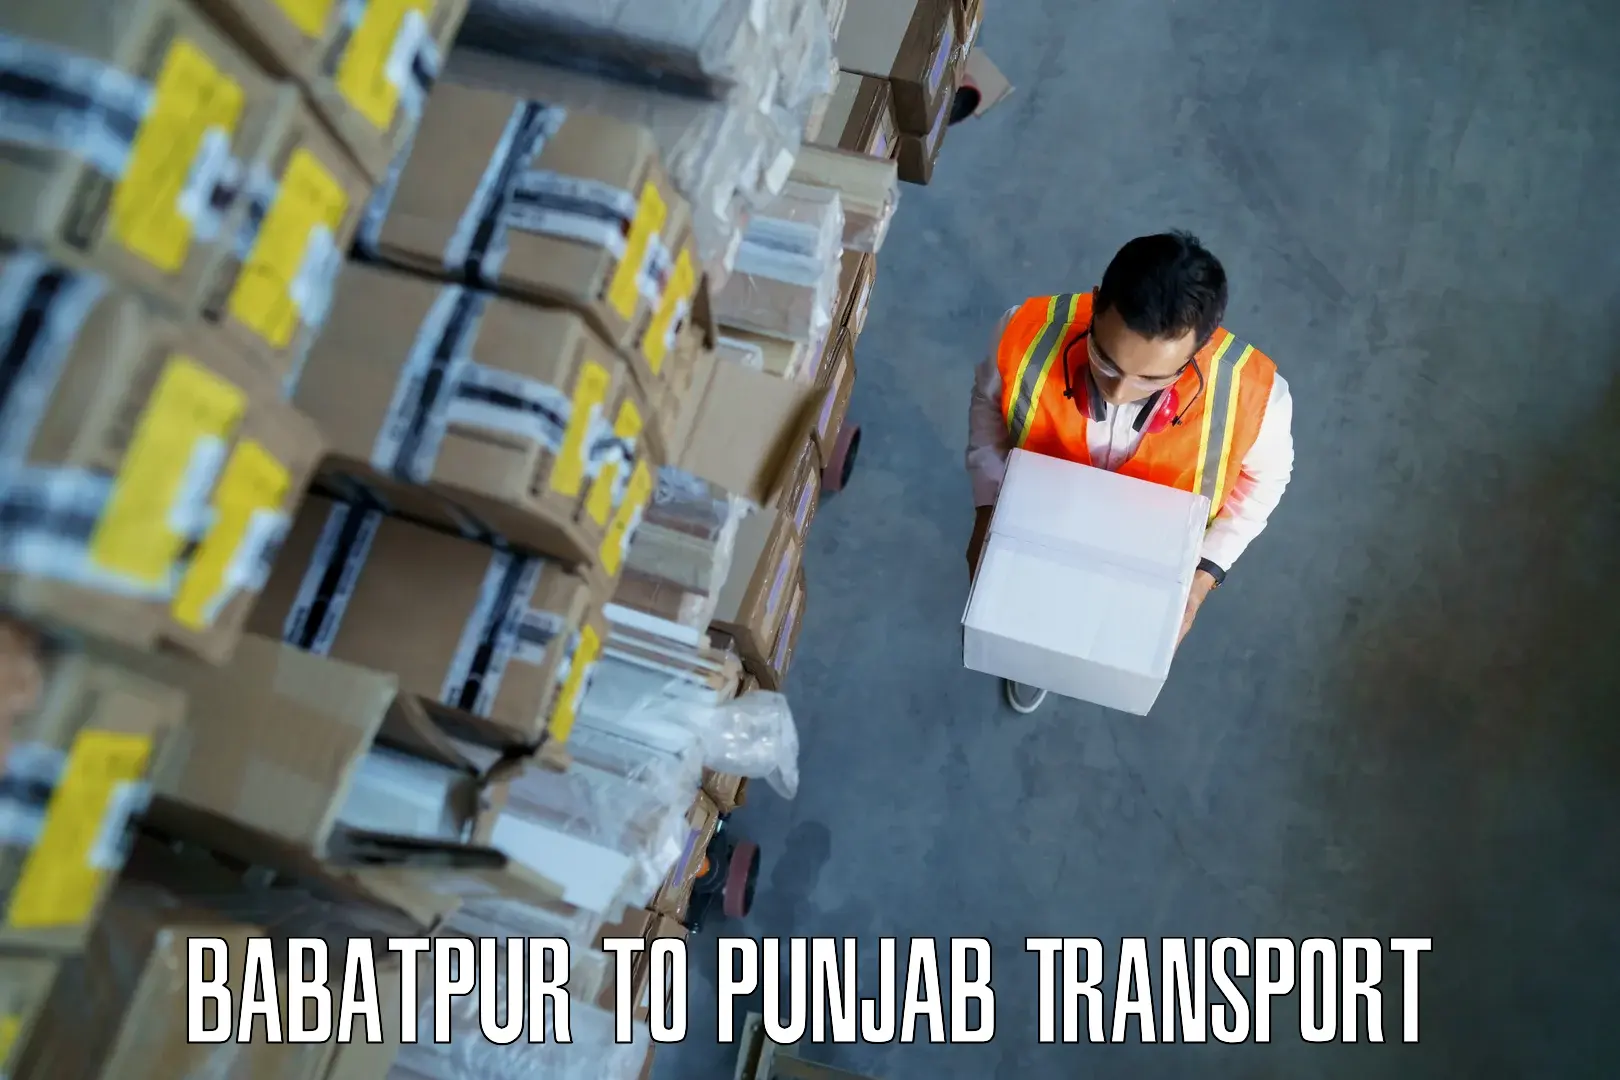 Nationwide transport services Babatpur to Dera Bassi